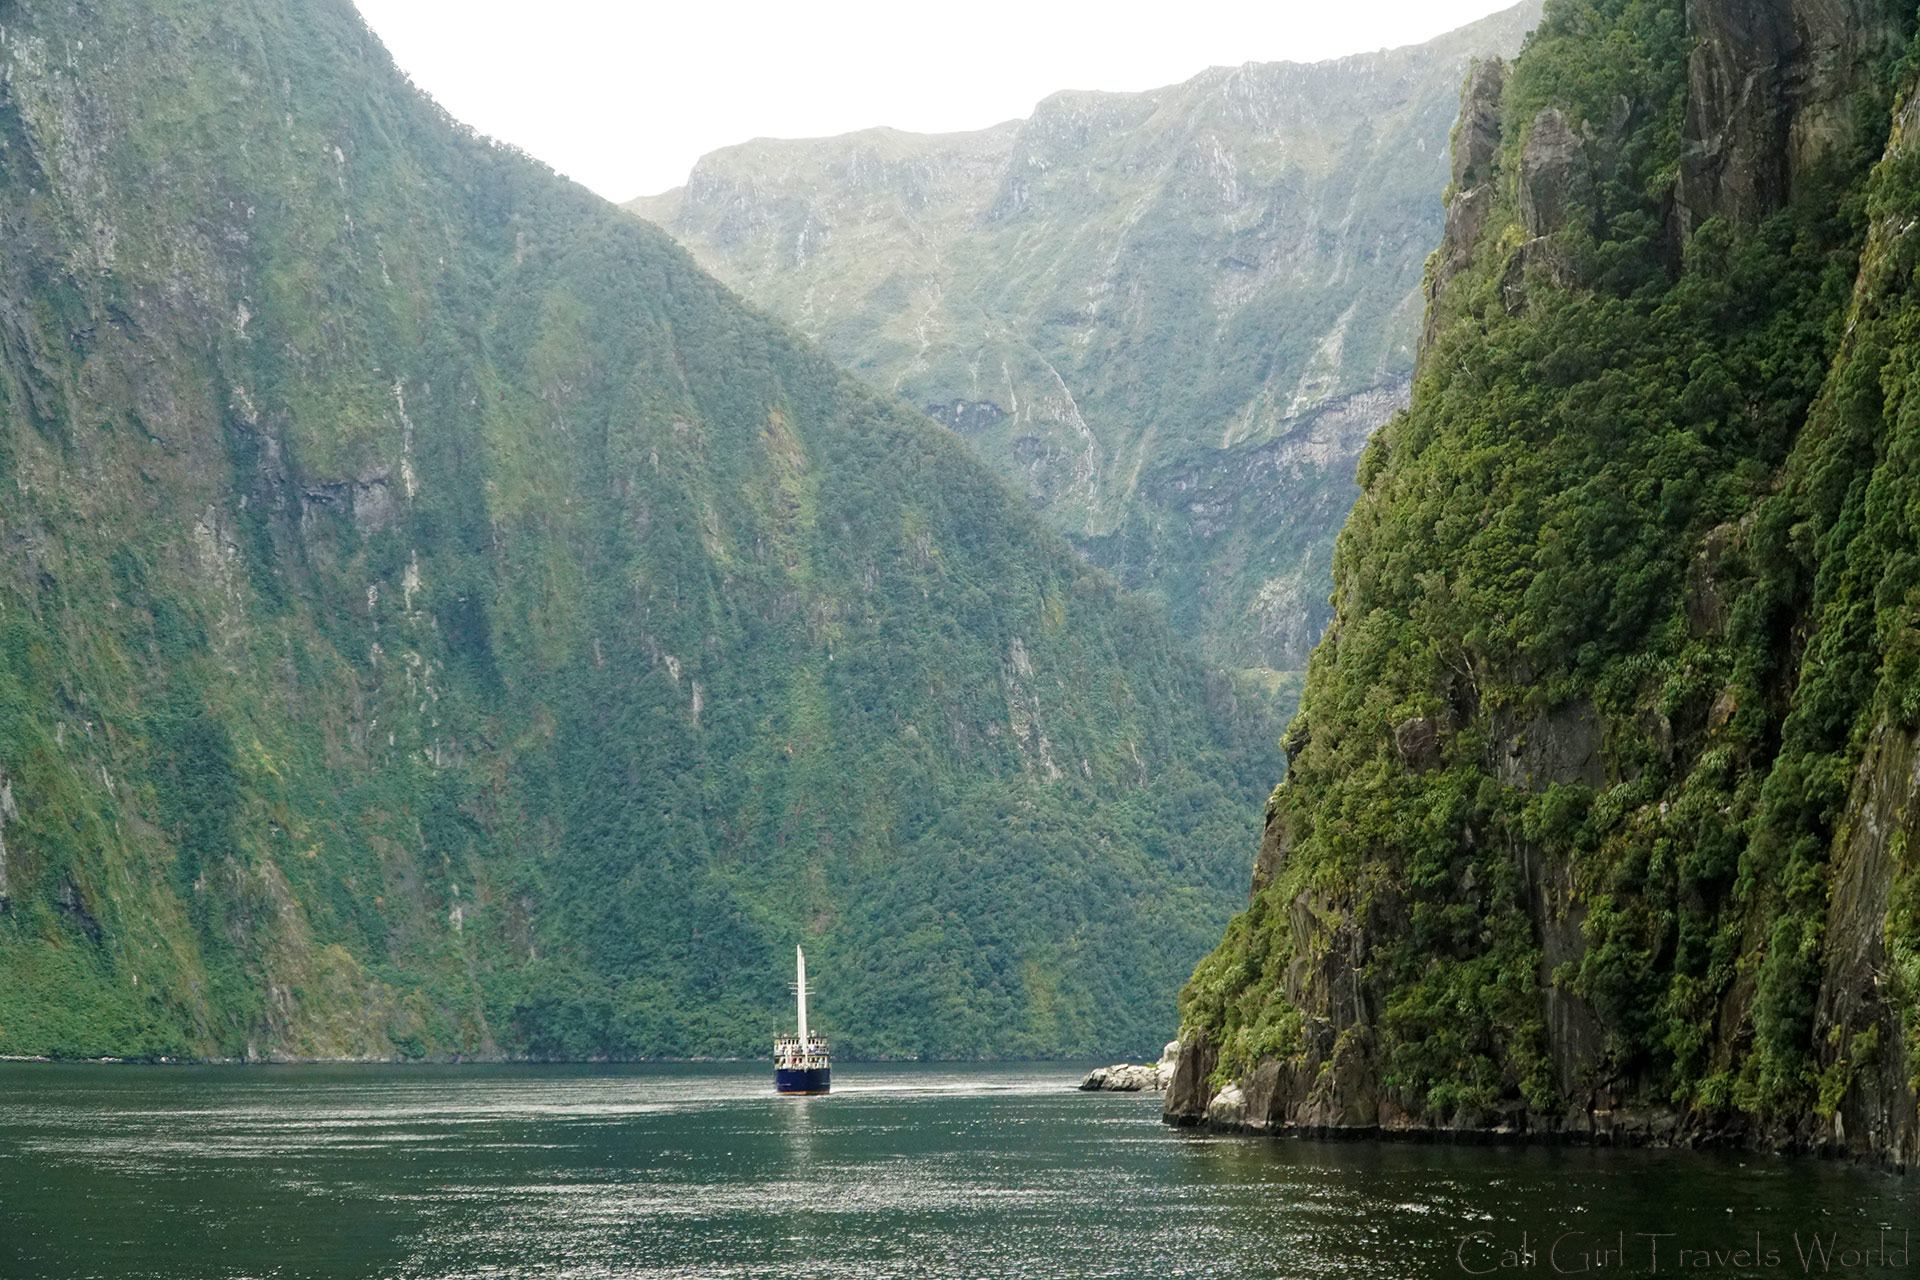 Boat coasting along Milford Sound in South Island, New Zealand - stunning beauty.